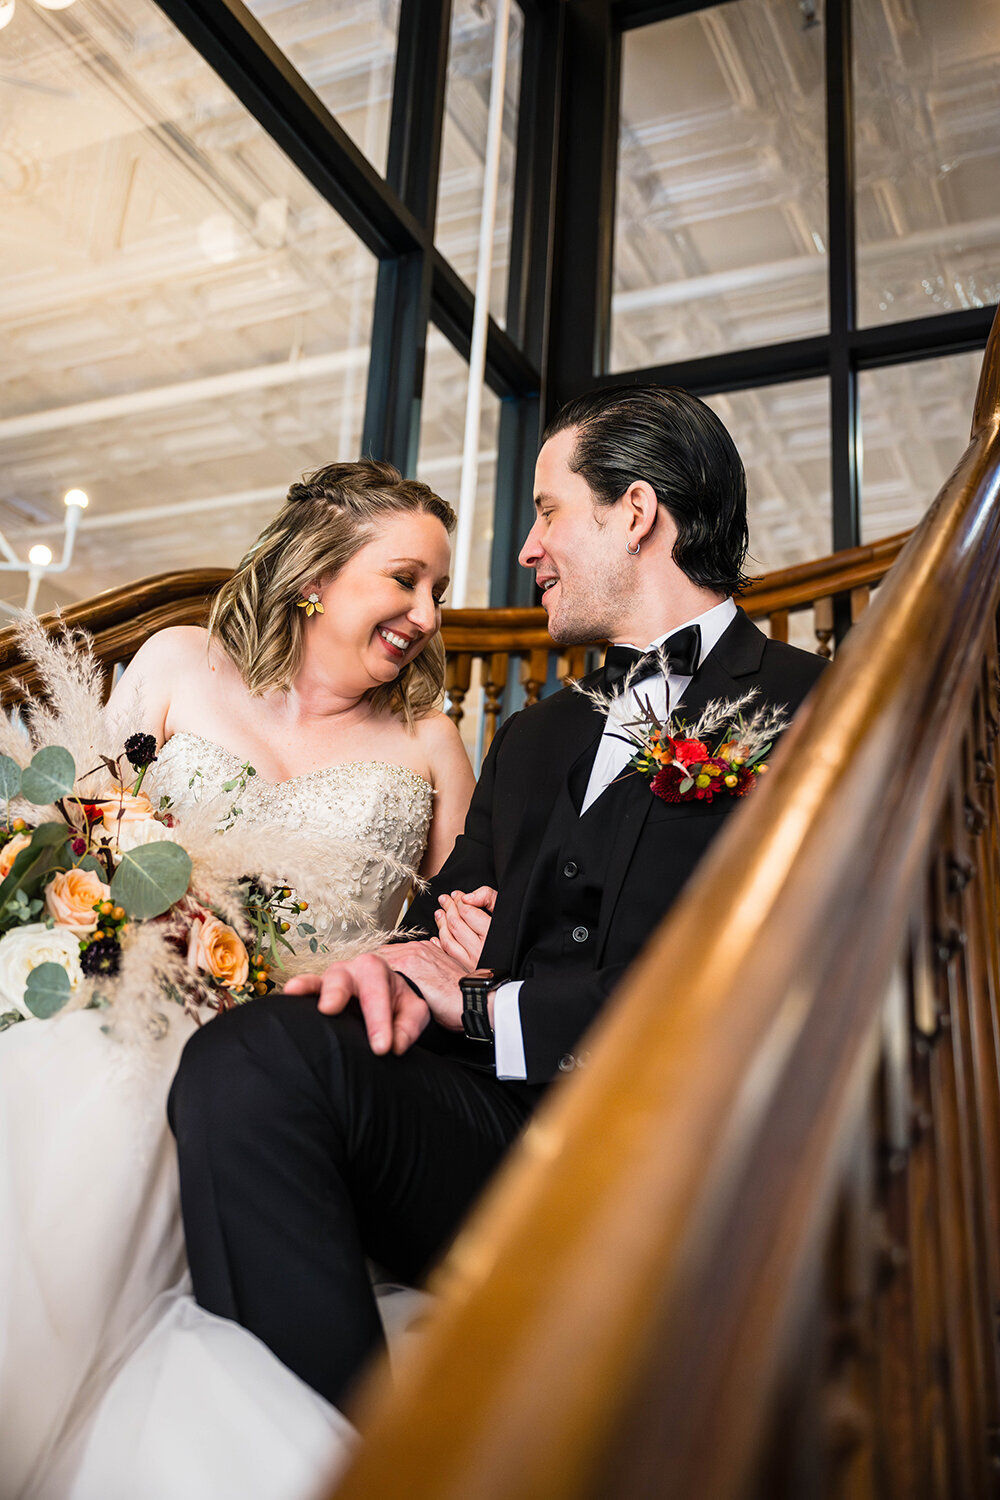 A couple on their elopement day sit side-by-side on a stairwell in the renovated Fire Station One hotel in Roanoke, Virginia and smile and laugh at one another.